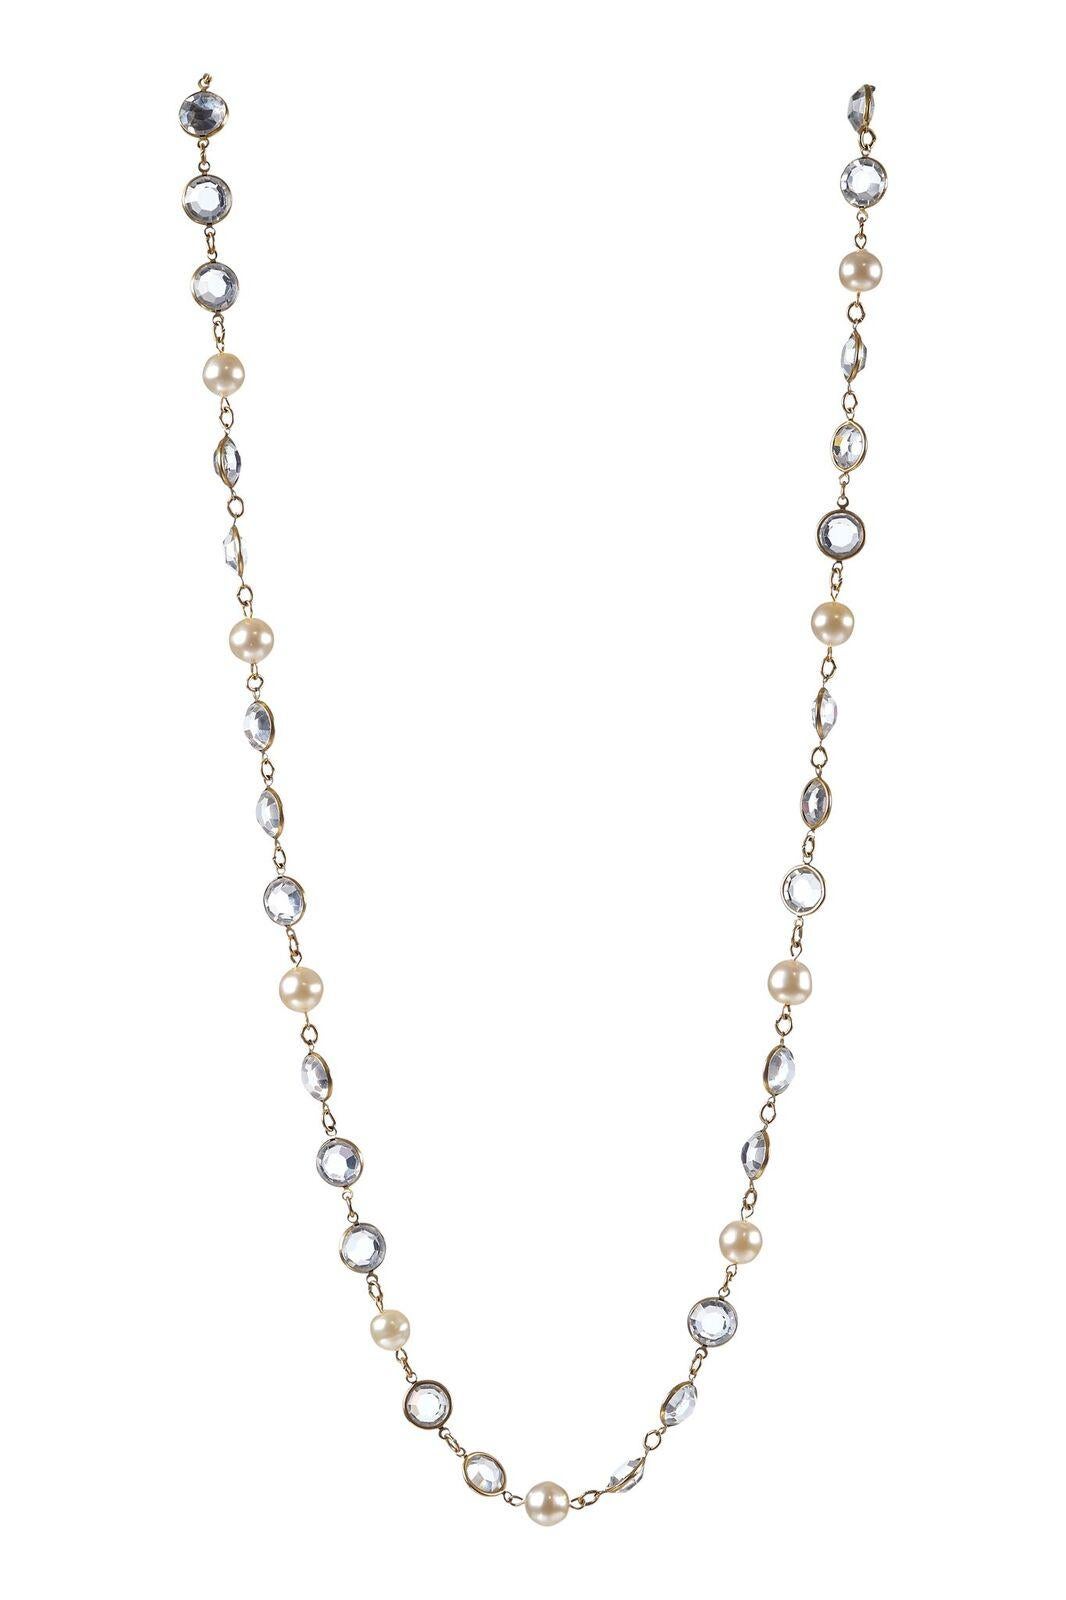 This beautiful Chanel gold tone sautoir necklace with cut crystal and pearlescent beads is delicate and feminine and in excellent condition. Each crystal is set in a circular gold gilt frame with small link divisions between each charm. Can be worn